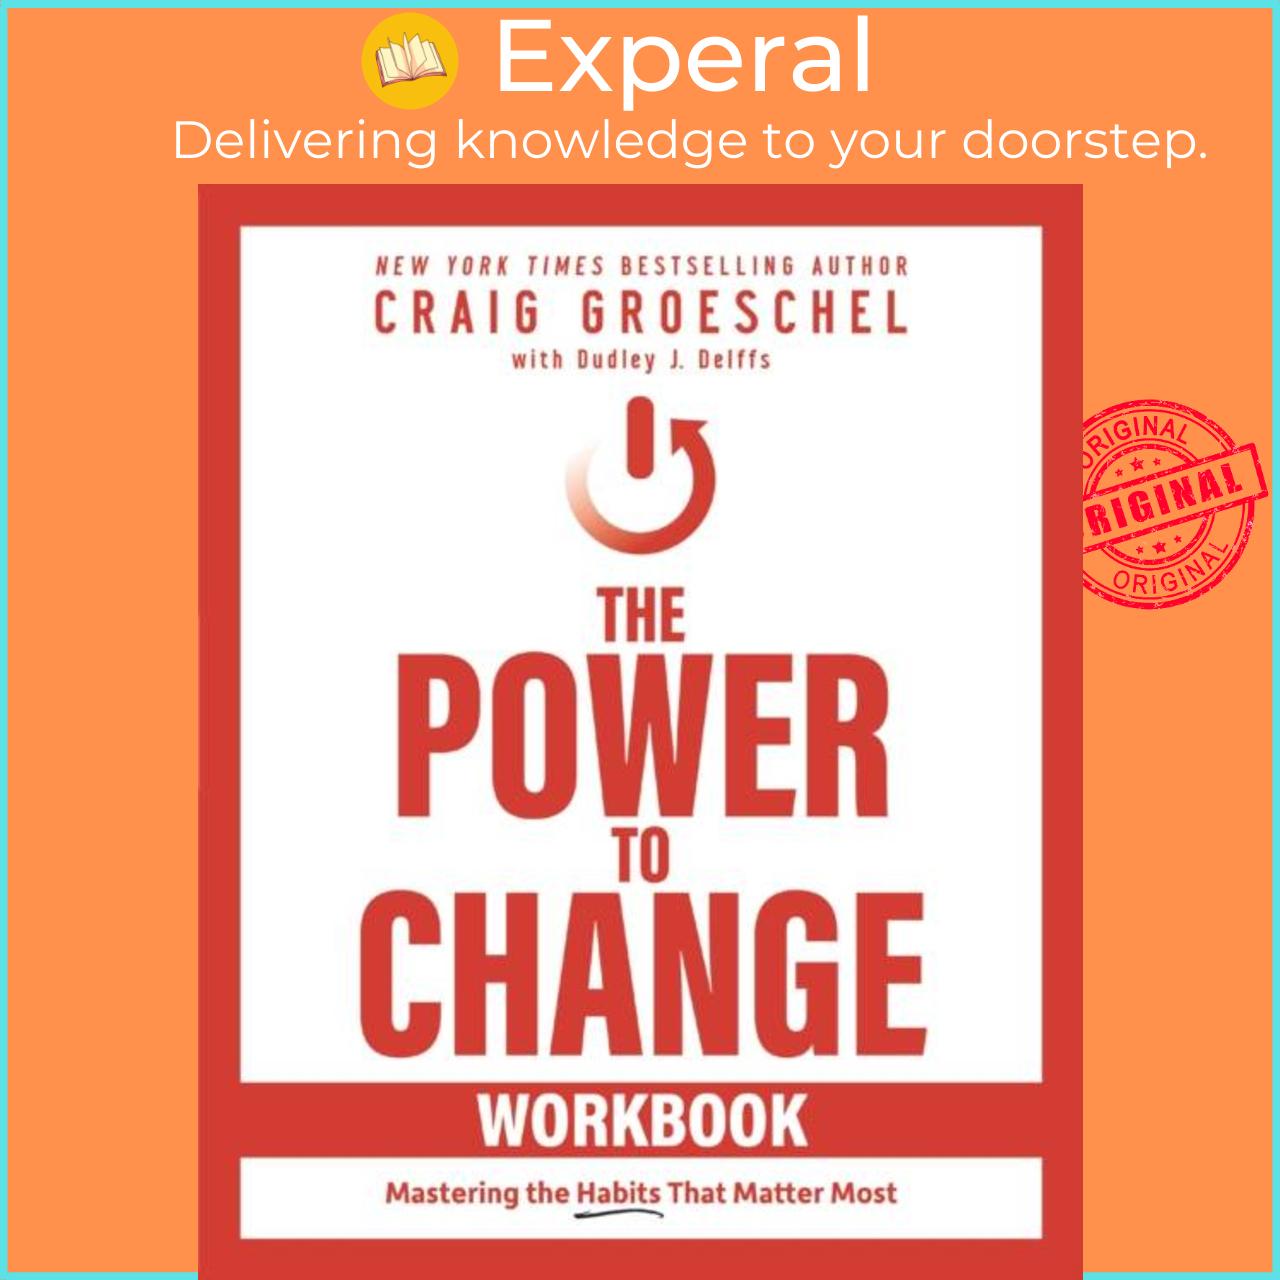 Sách - The Power to Change Workbook - Mastering the Habits That Matter Most by Craig Groeschel (UK edition, paperback)